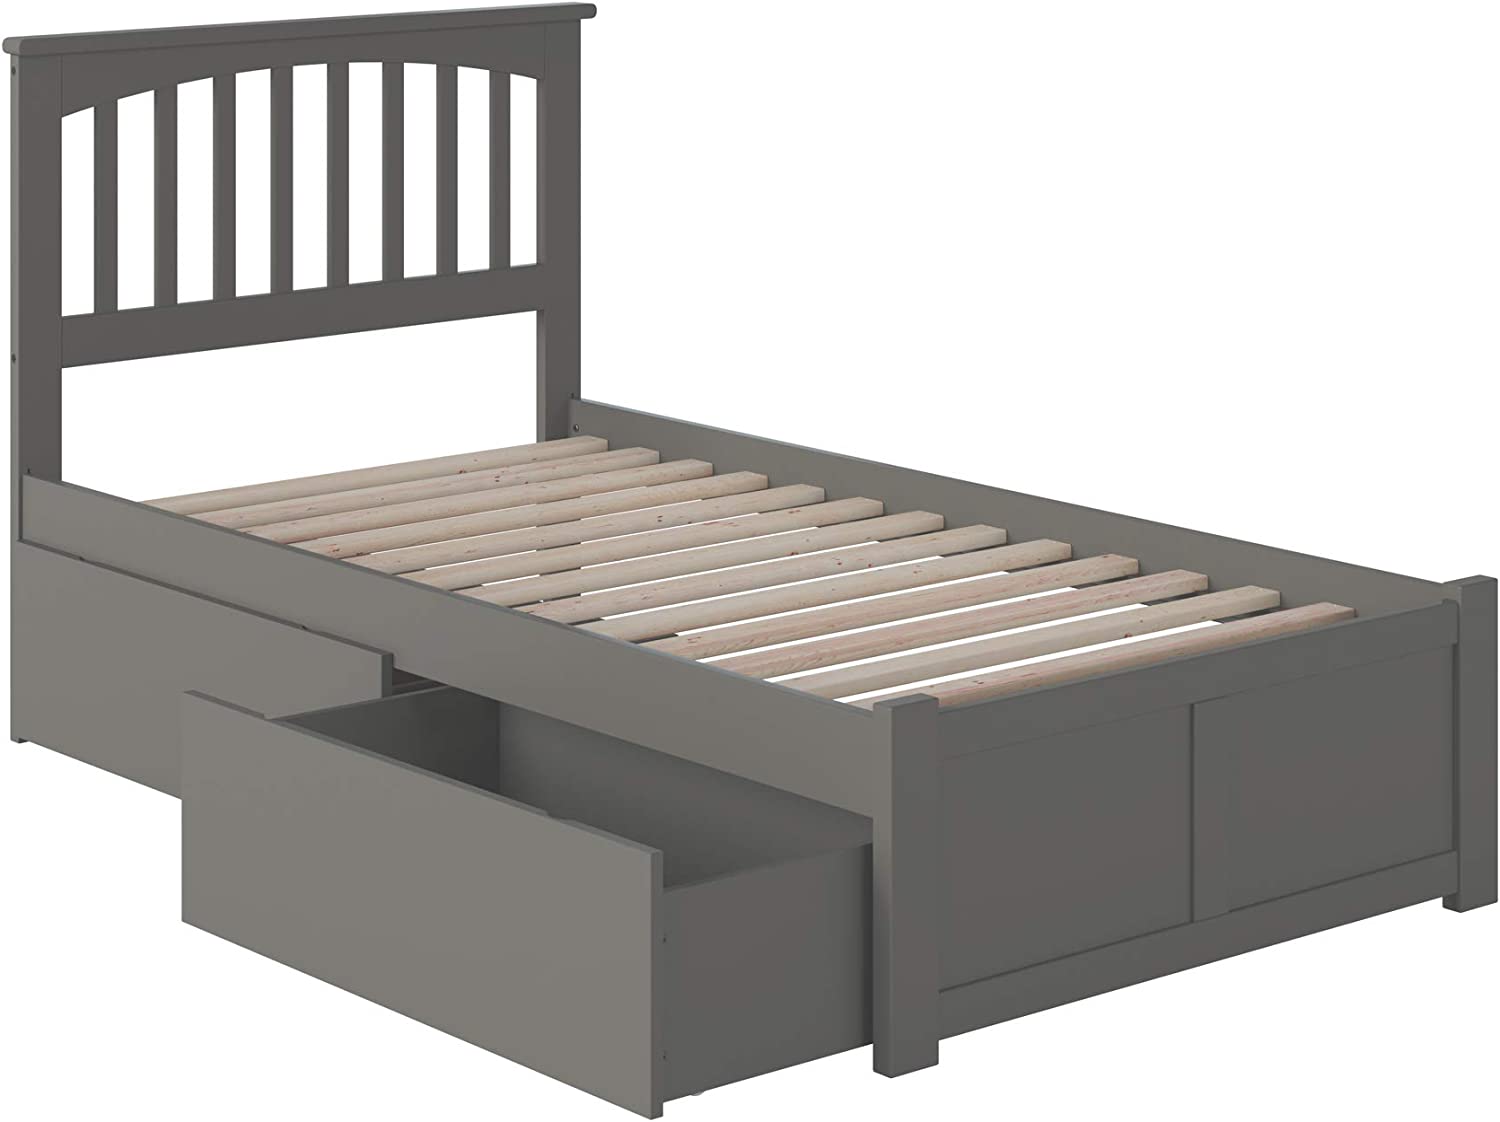 AFI Mission Platform Flat Panel Footboard and Turbo Charger with Urban Bed Drawers, Twin XL, Grey